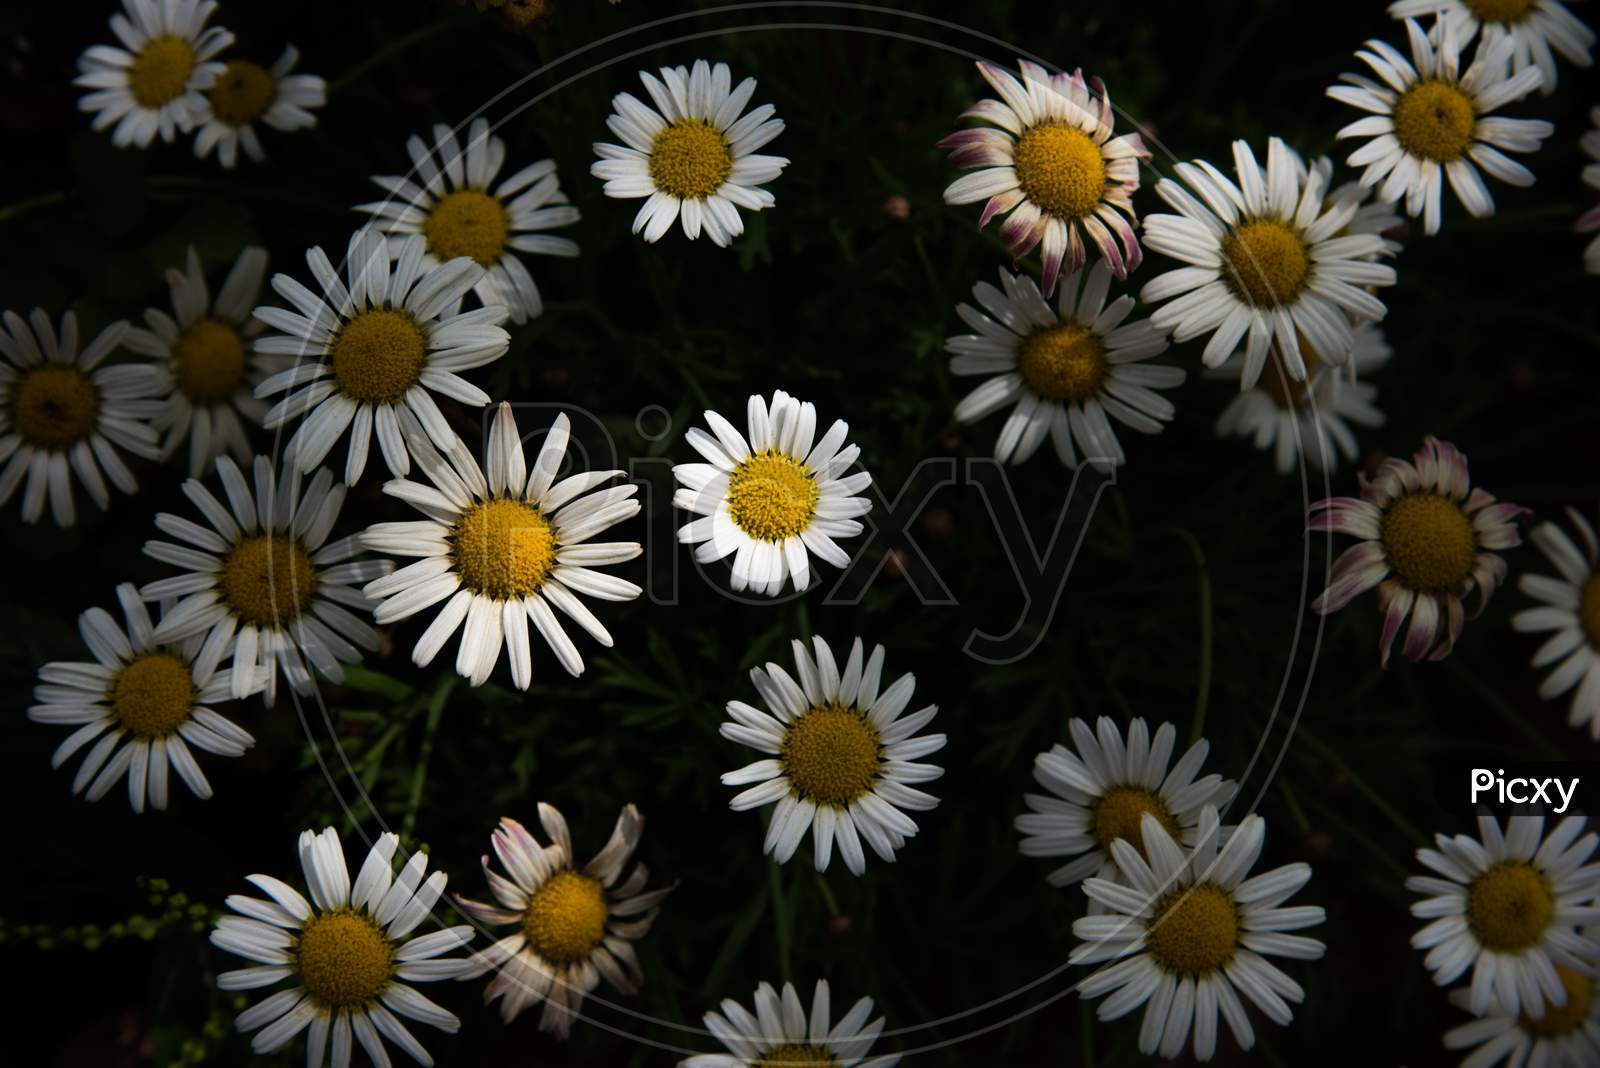 Daisy Flowers Blooming In Garden. Outdoor Nature Concept. Low Key And High Contrast Tone